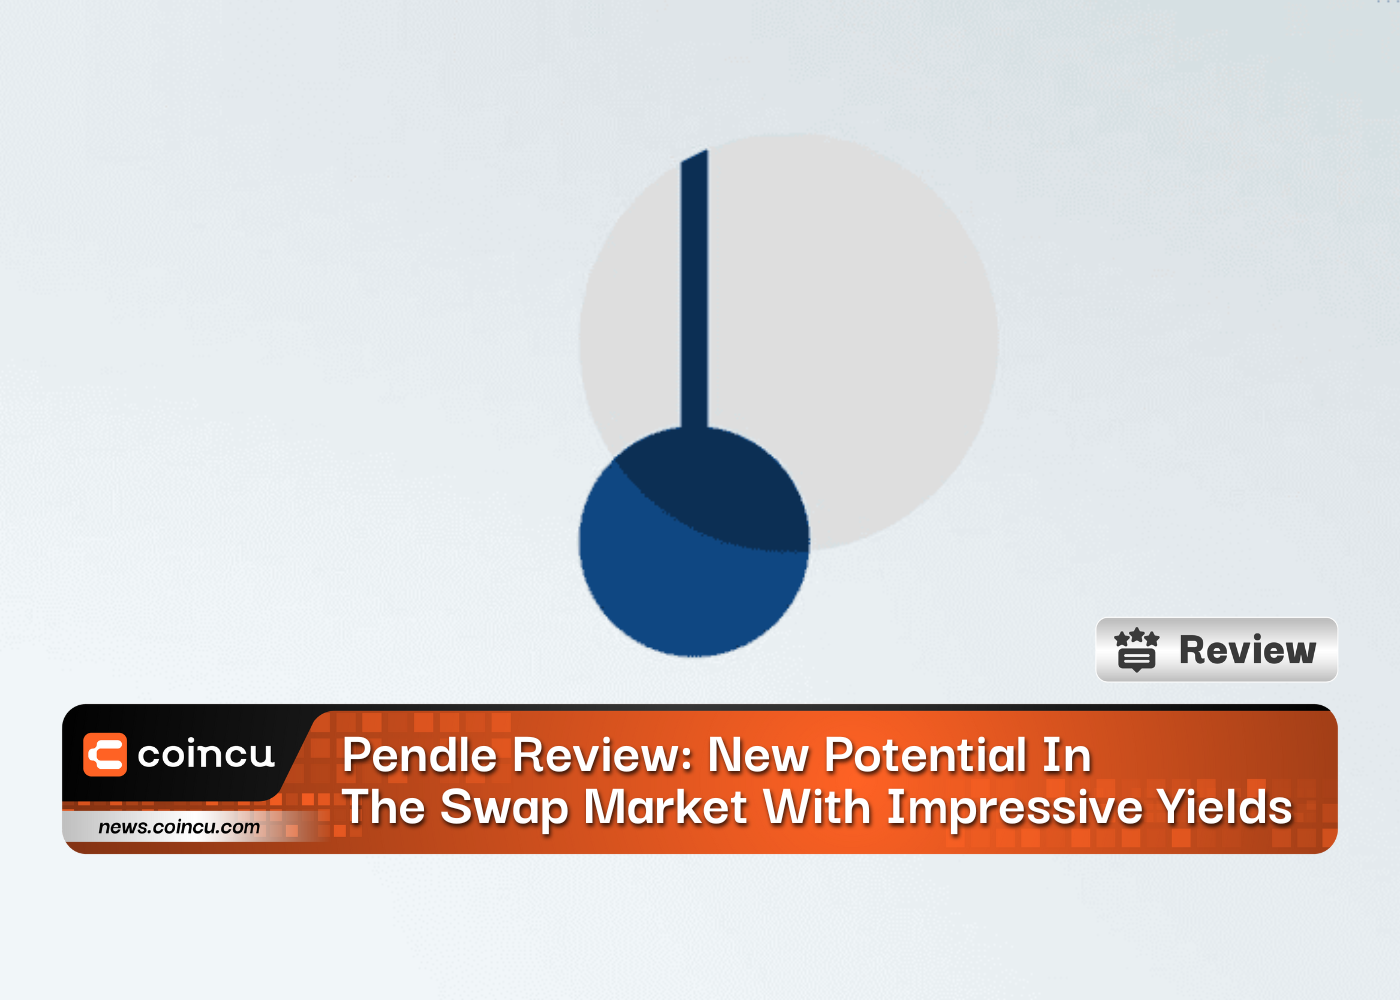 Pendle Review: New Potential In The Swap Market With Impressive Yields